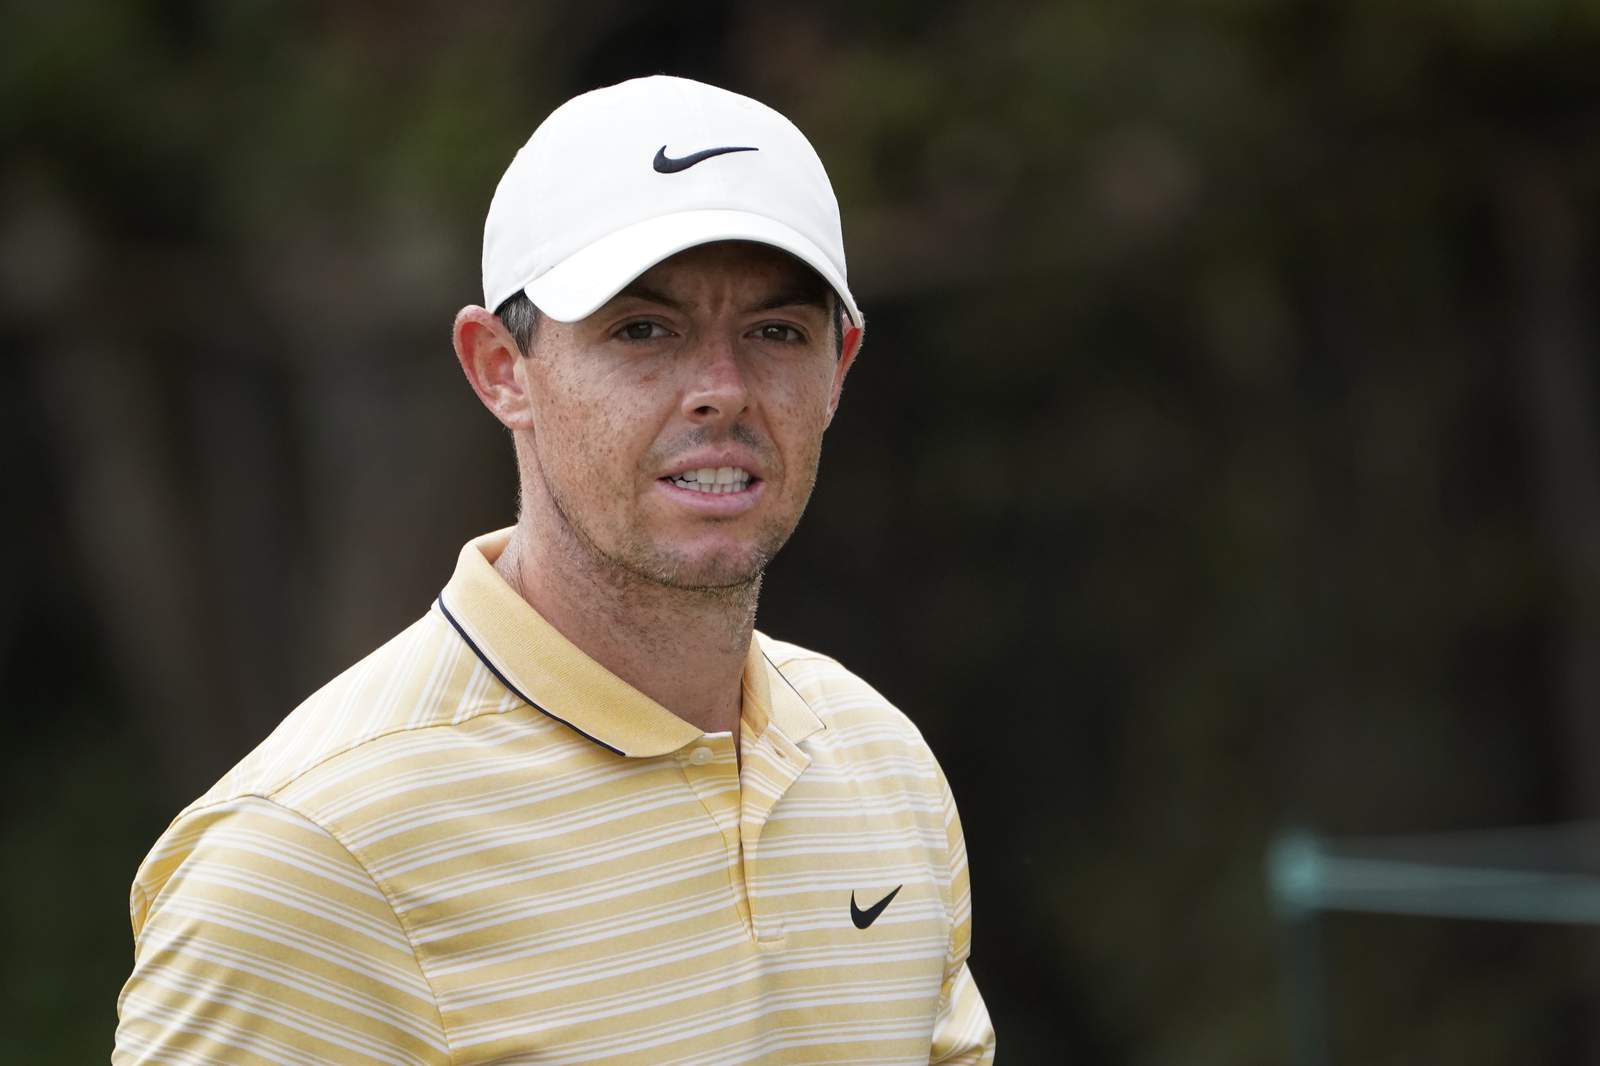 McIlroy reveals he's about to become a first-time father